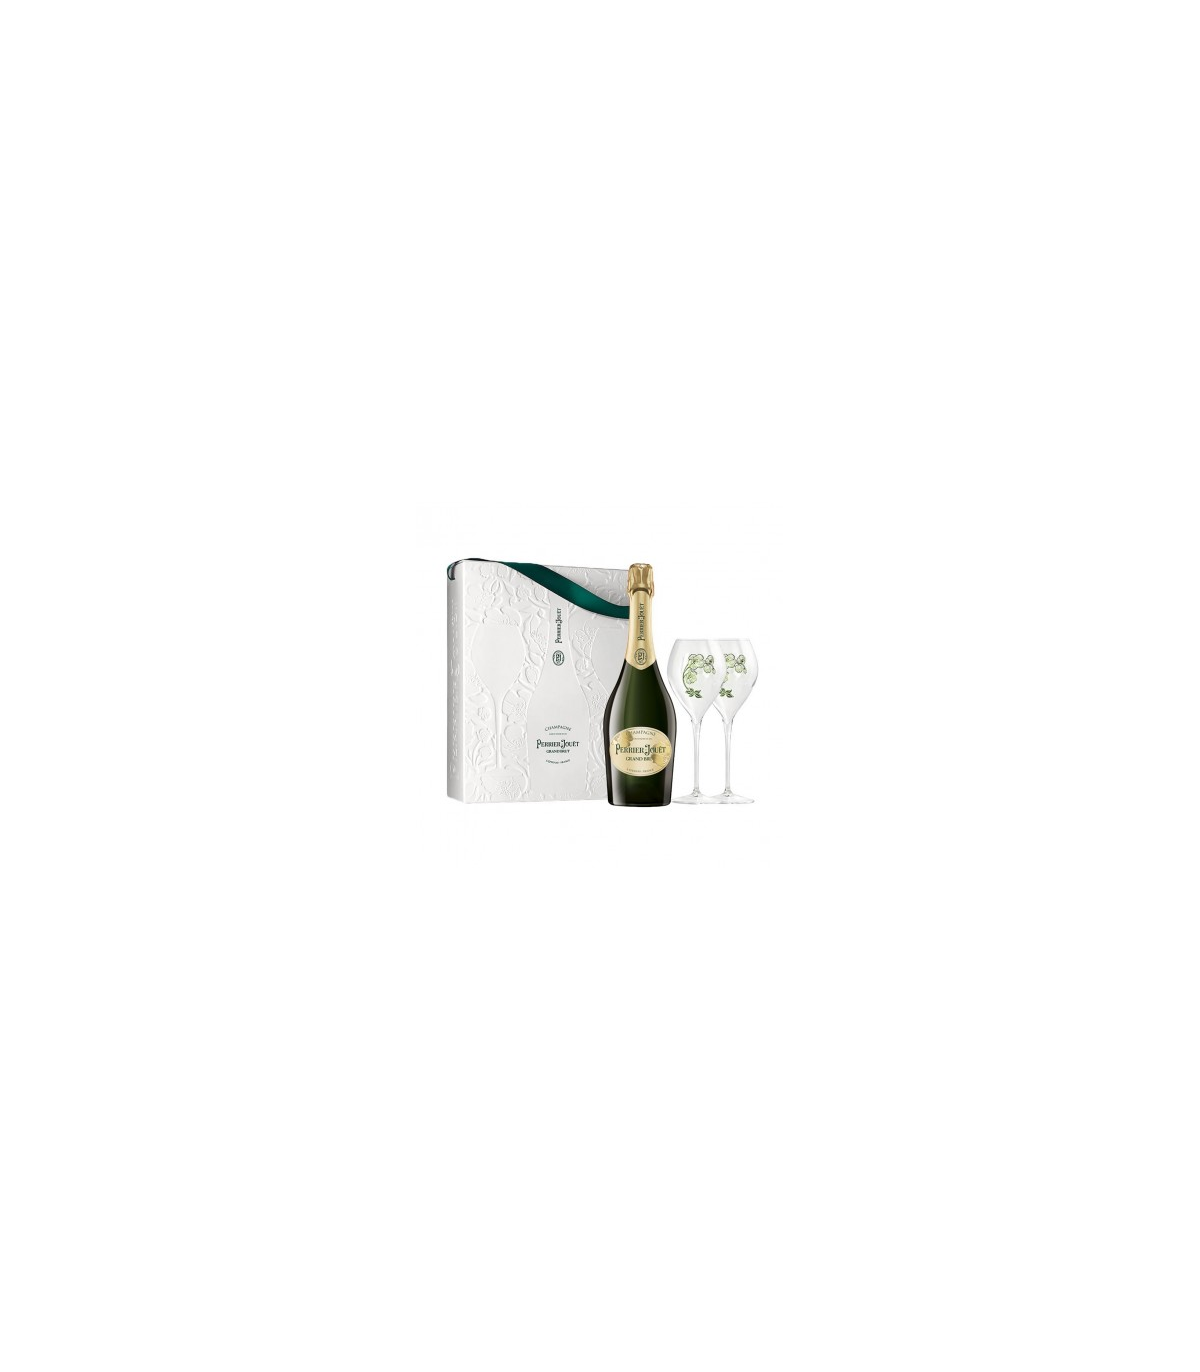 Moet & Chandon Champagne and Flutes Gift Set